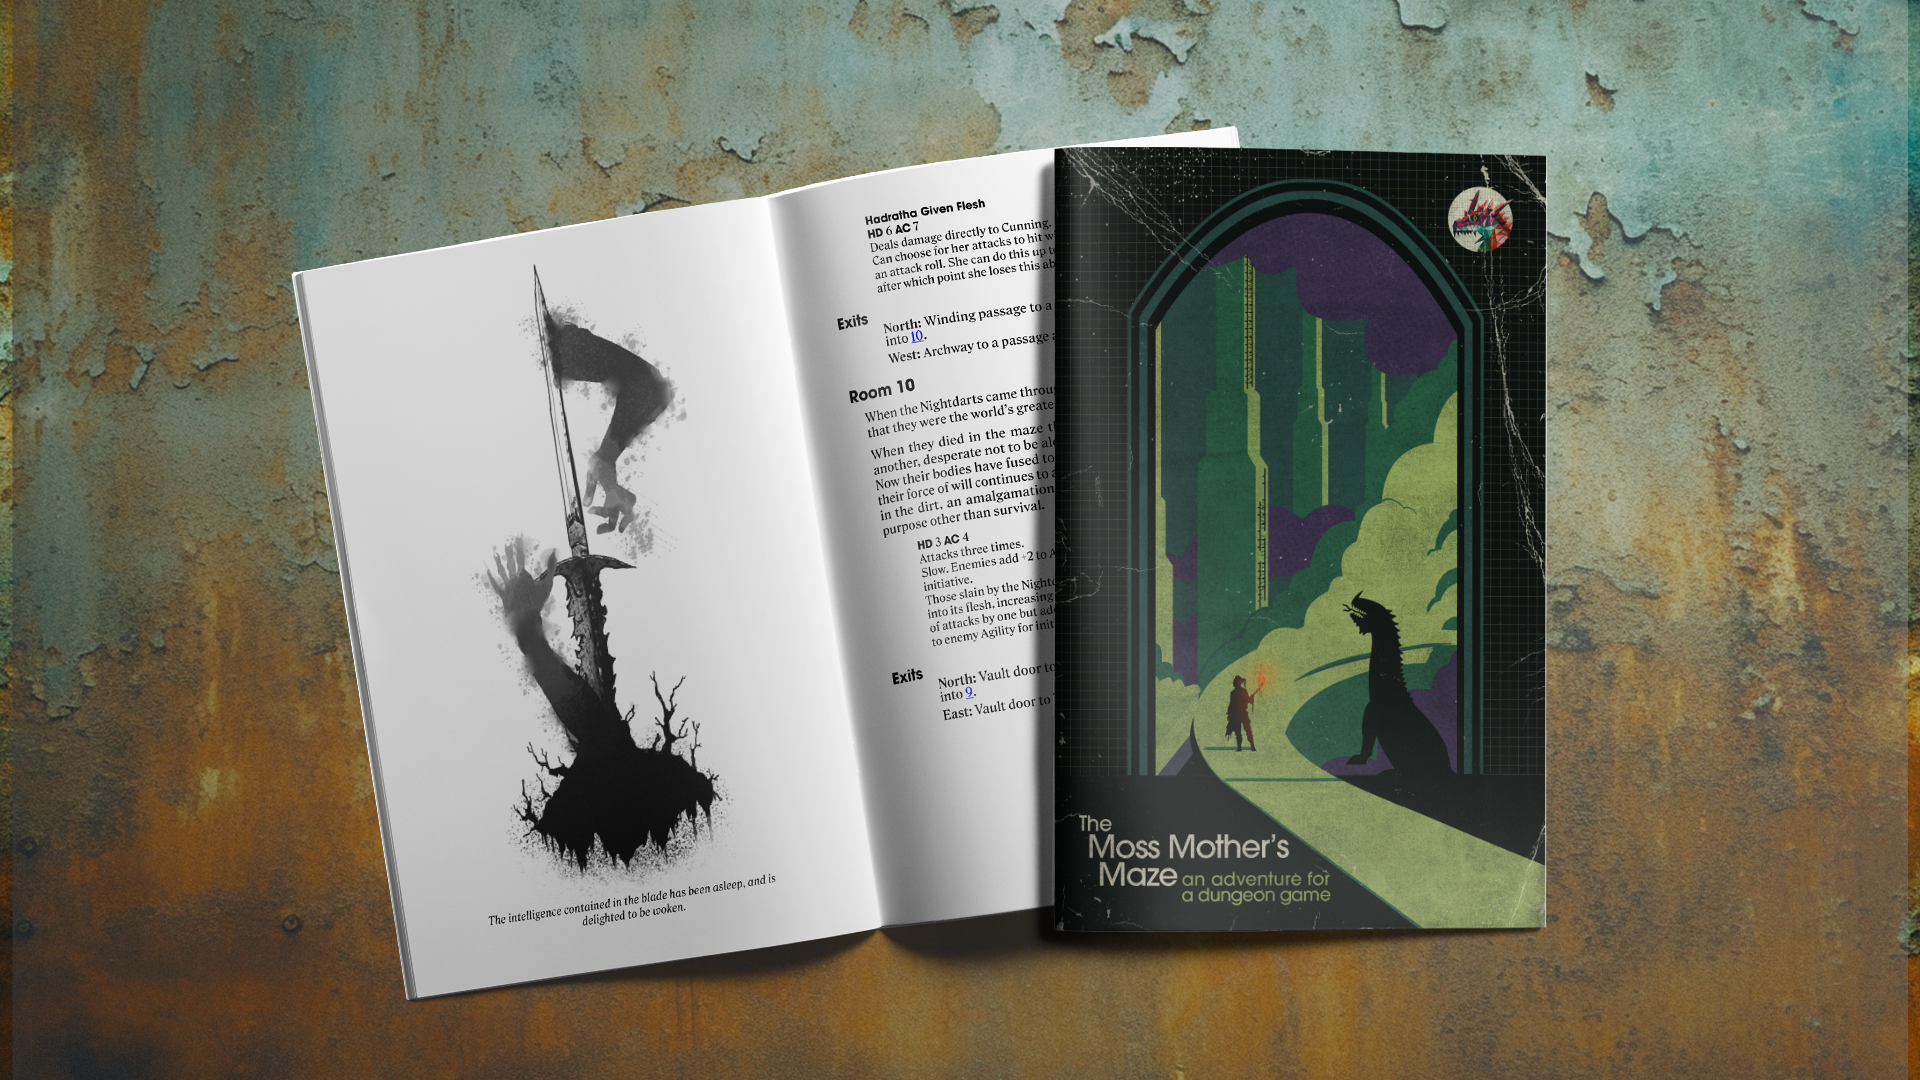 A digital mock-up of a pair of softcover zines lying on a rusted surface. One os open, showing a black and white illustration of a sword with spectral hands emerging from it. The facing page contains text that's obscured by the other book, which rests on top of the open page. It is closed and shows a cover image of a green path winding into a smoke-filled maze. An adventurer walks along it, torch raised high, oblivious to the dragon looming out of the smoke beside them.